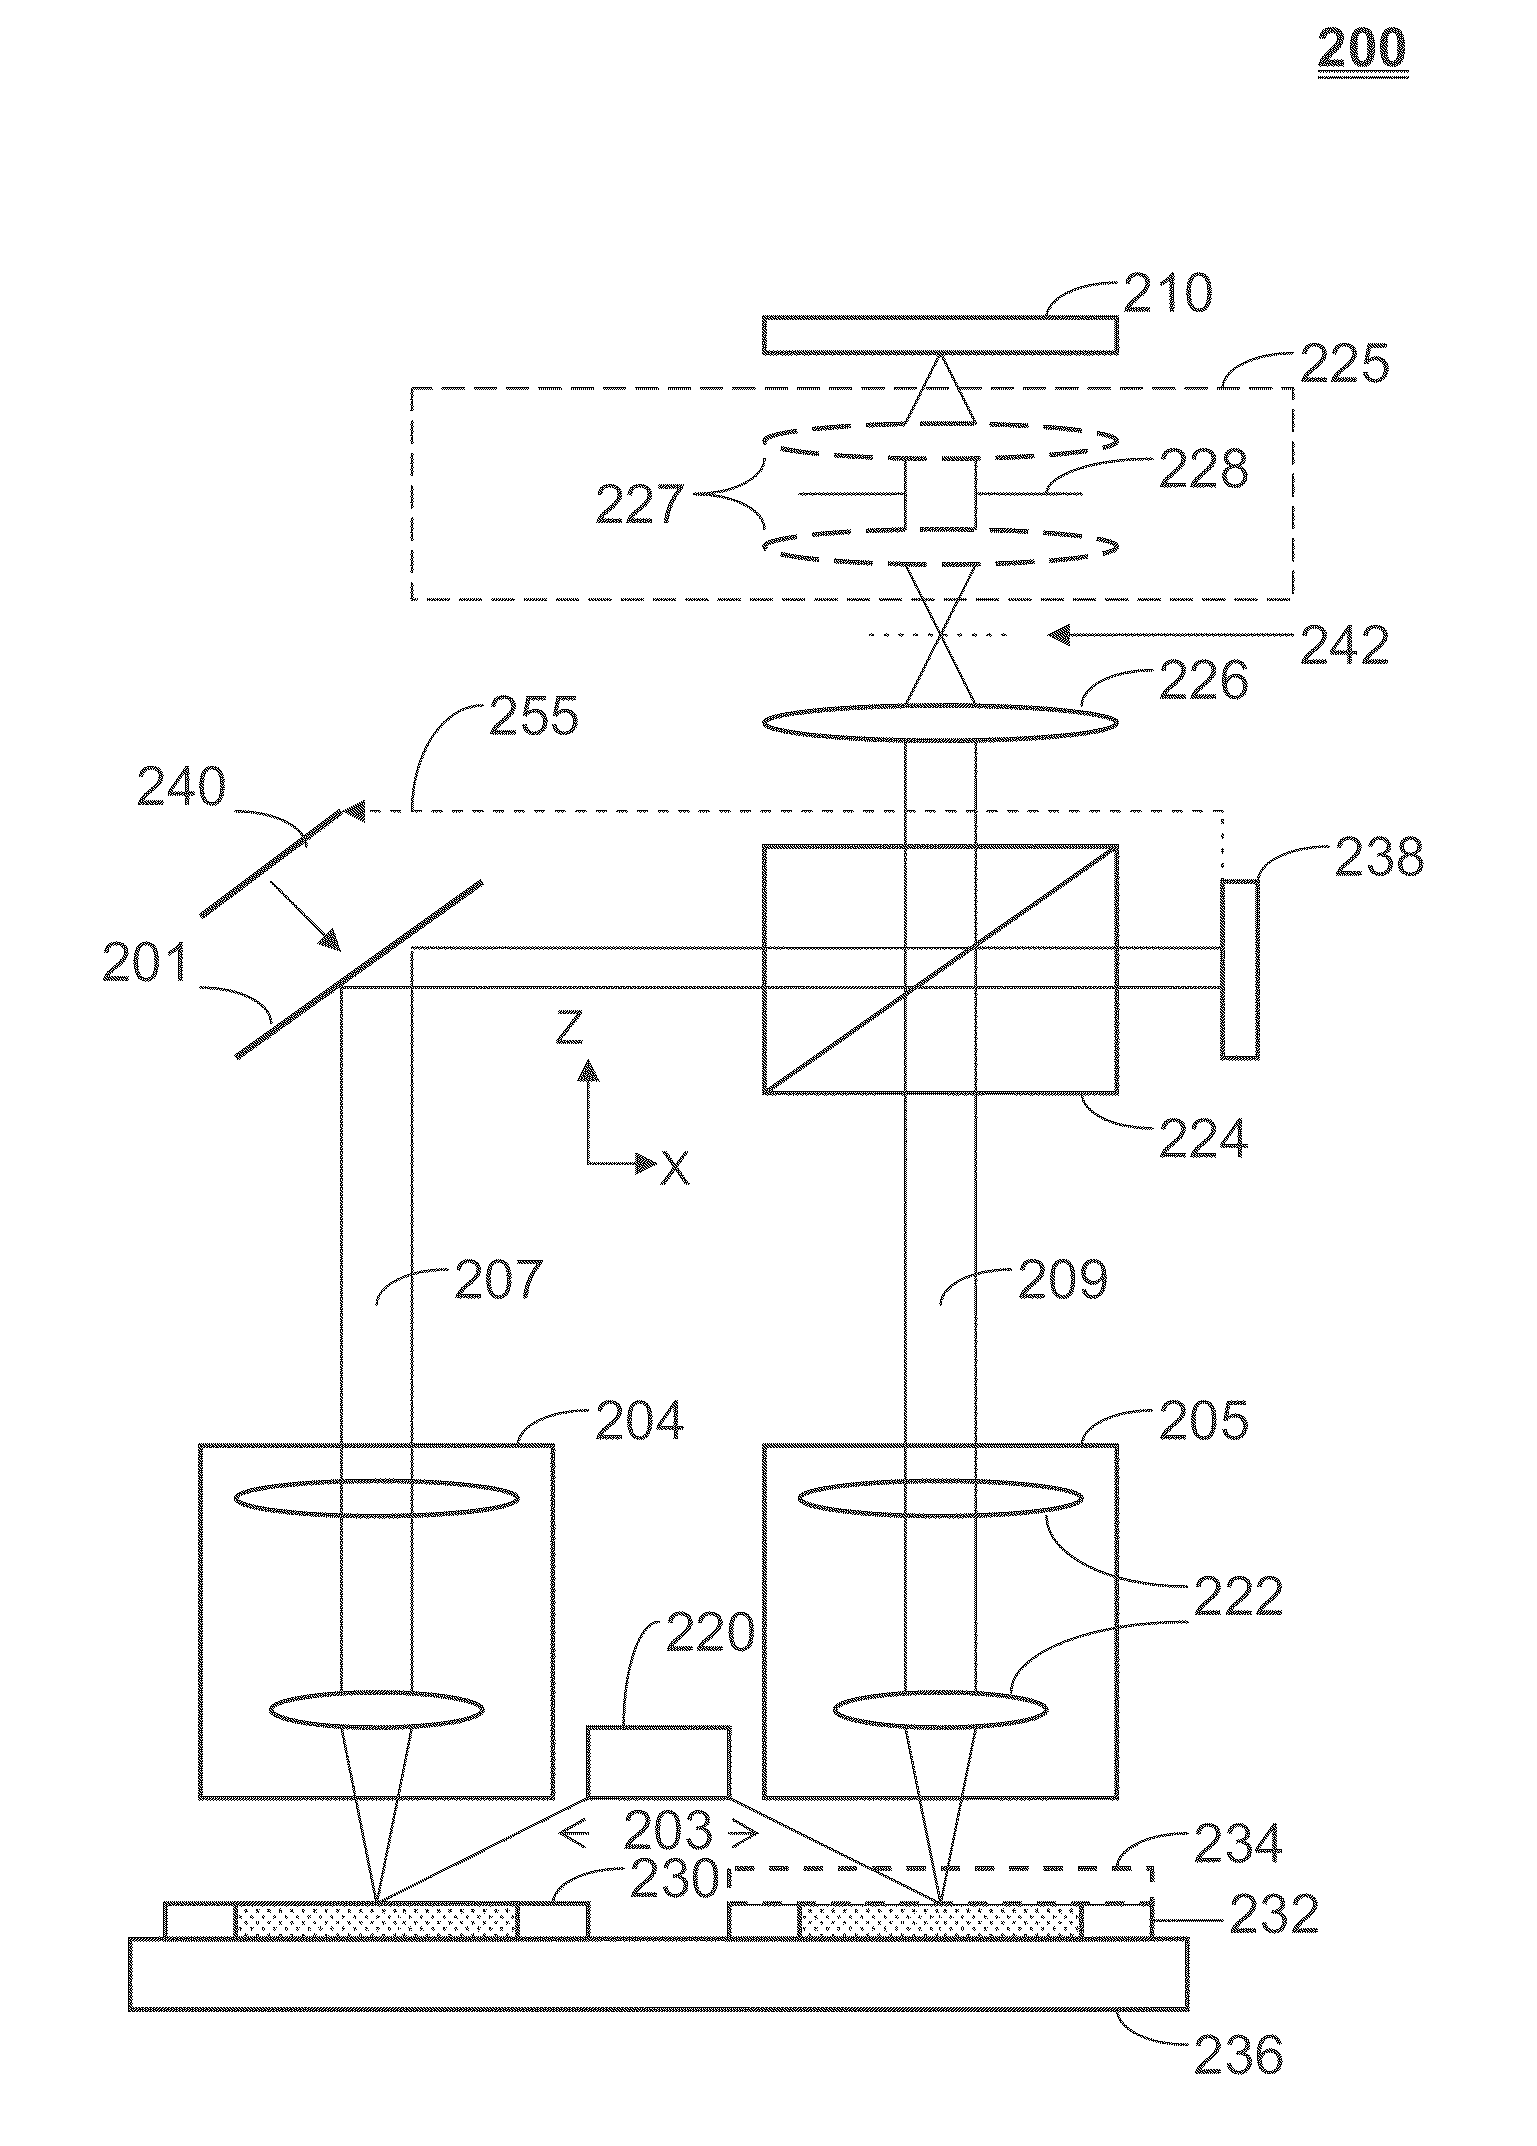 Reticle inspection systems and method